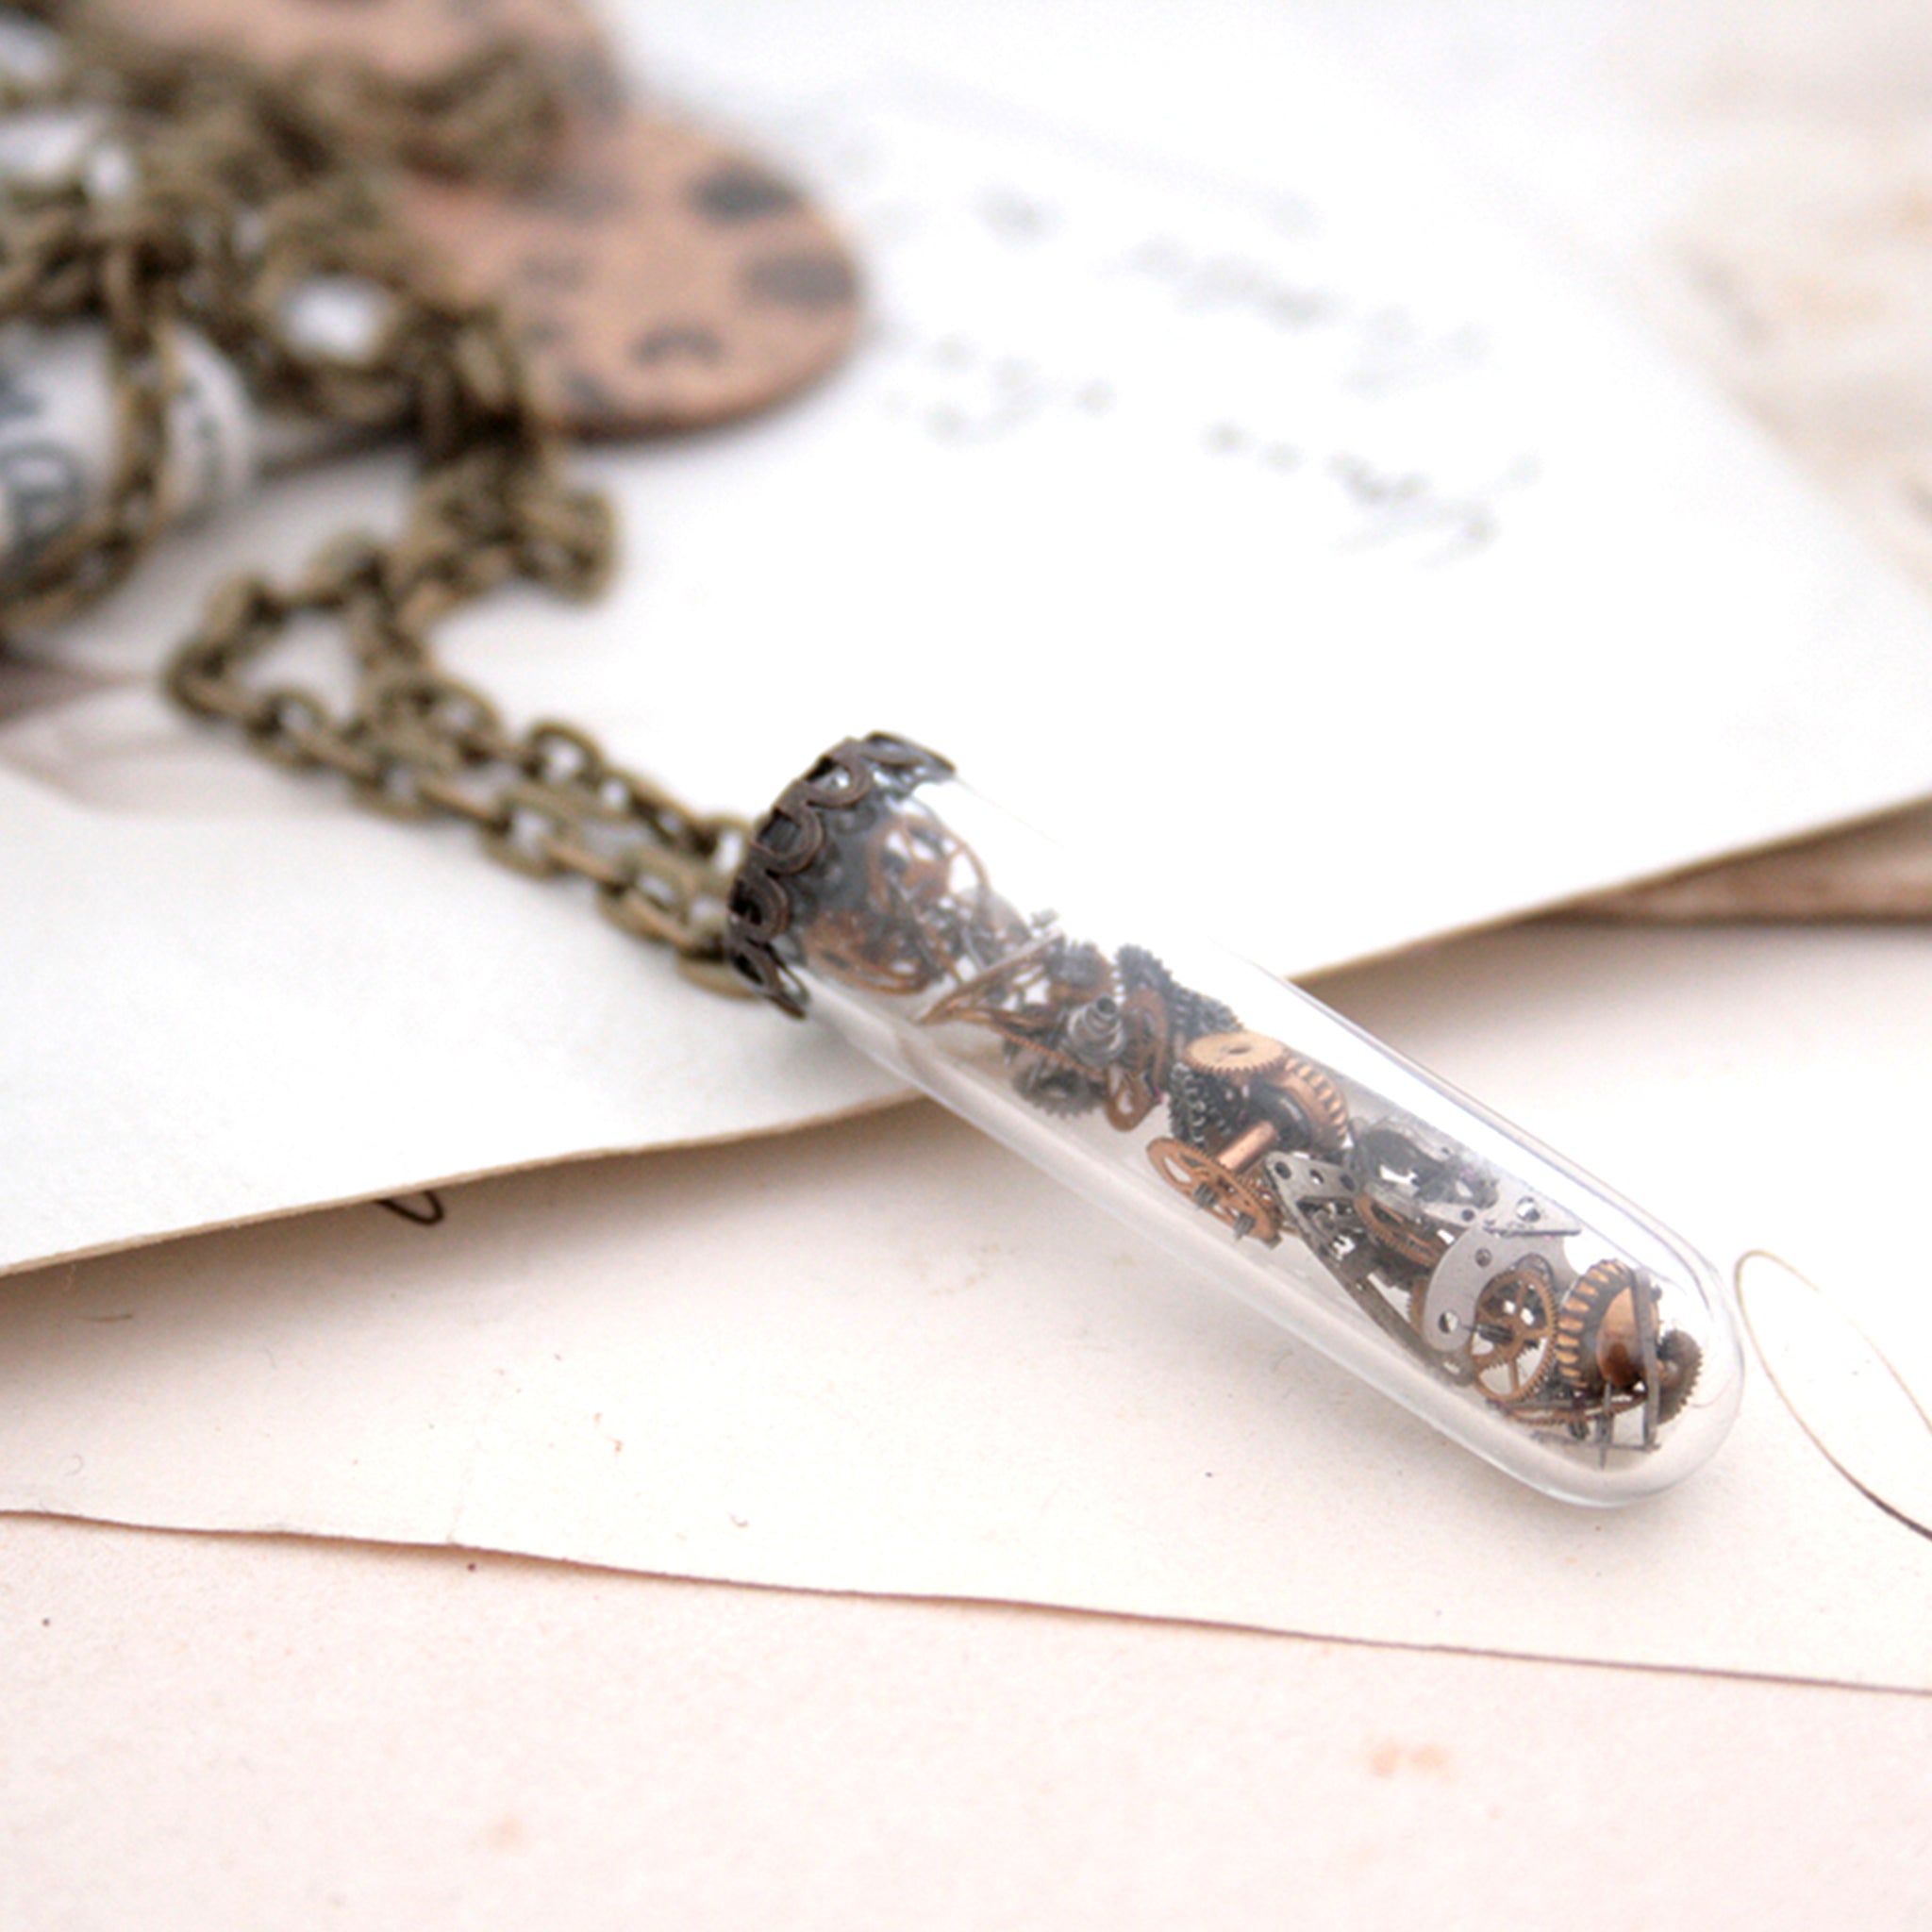 steampunk terrarium pendant necklace made of glass in vial shape filled with watch parts